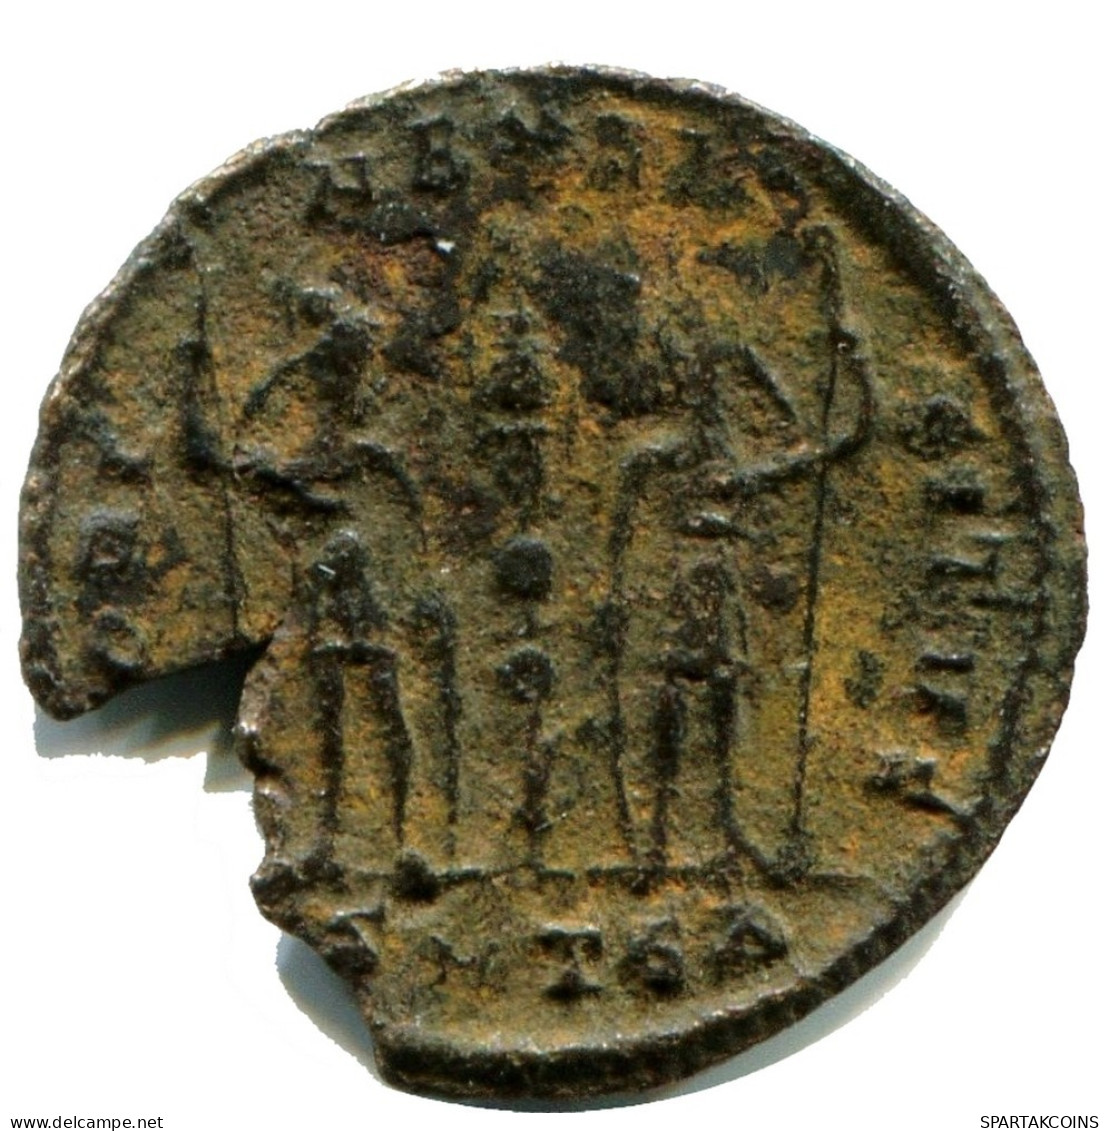 CONSTANS MINTED IN THESSALONICA FOUND IN IHNASYAH HOARD EGYPT #ANC11914.14.E.A - The Christian Empire (307 AD Tot 363 AD)